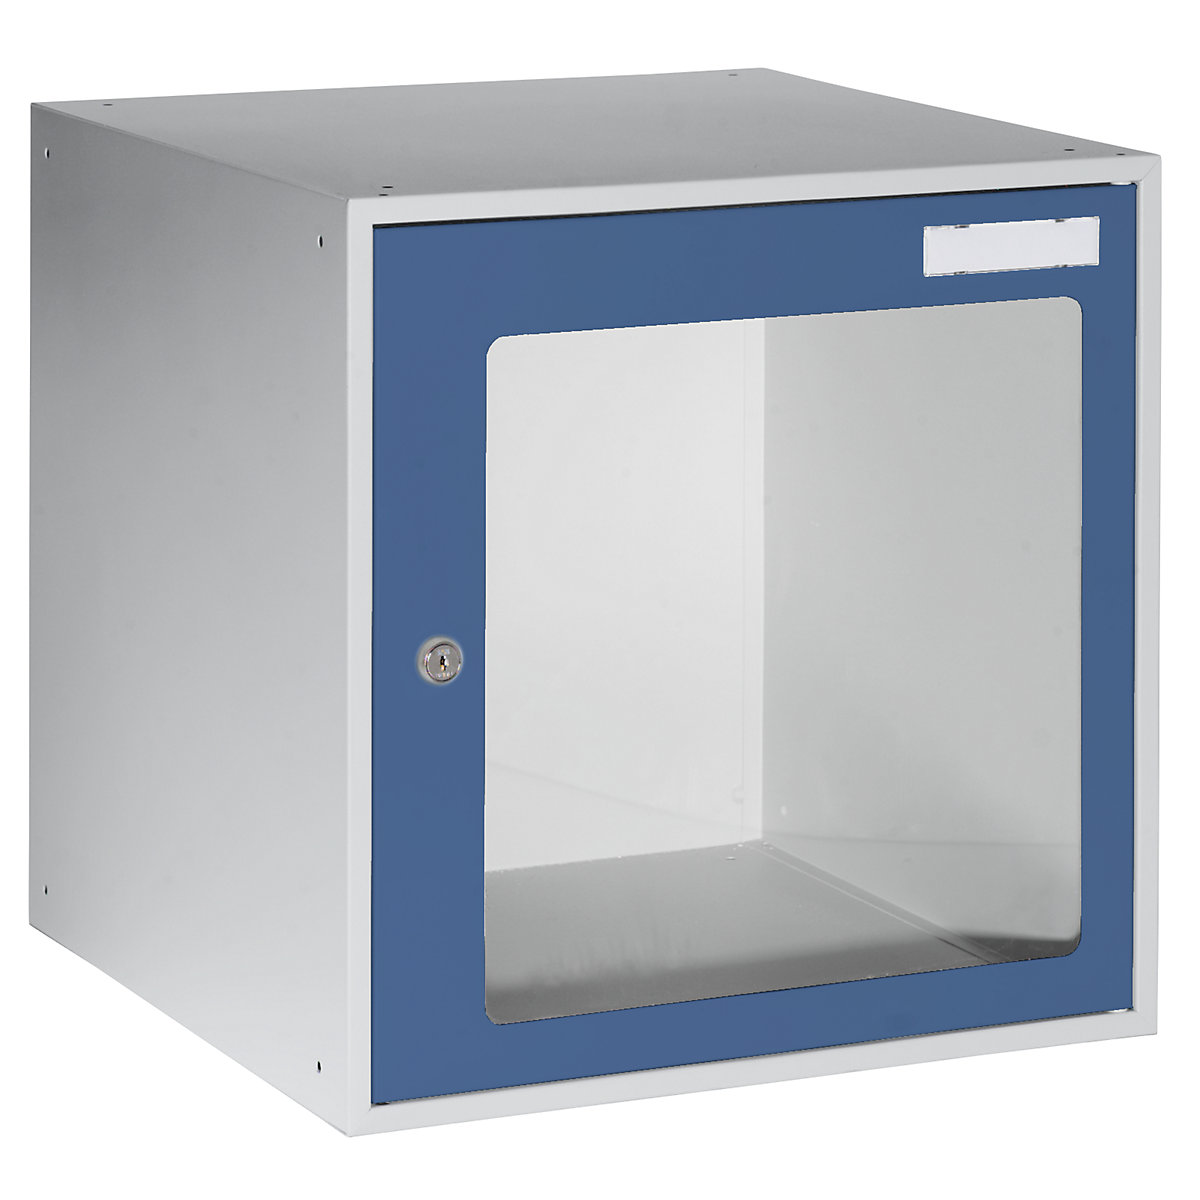 Cube lockers with vision panel – eurokraft basic, HxWxD 450 x 450 x 450 mm, door frame gentian blue RAL 5010-7